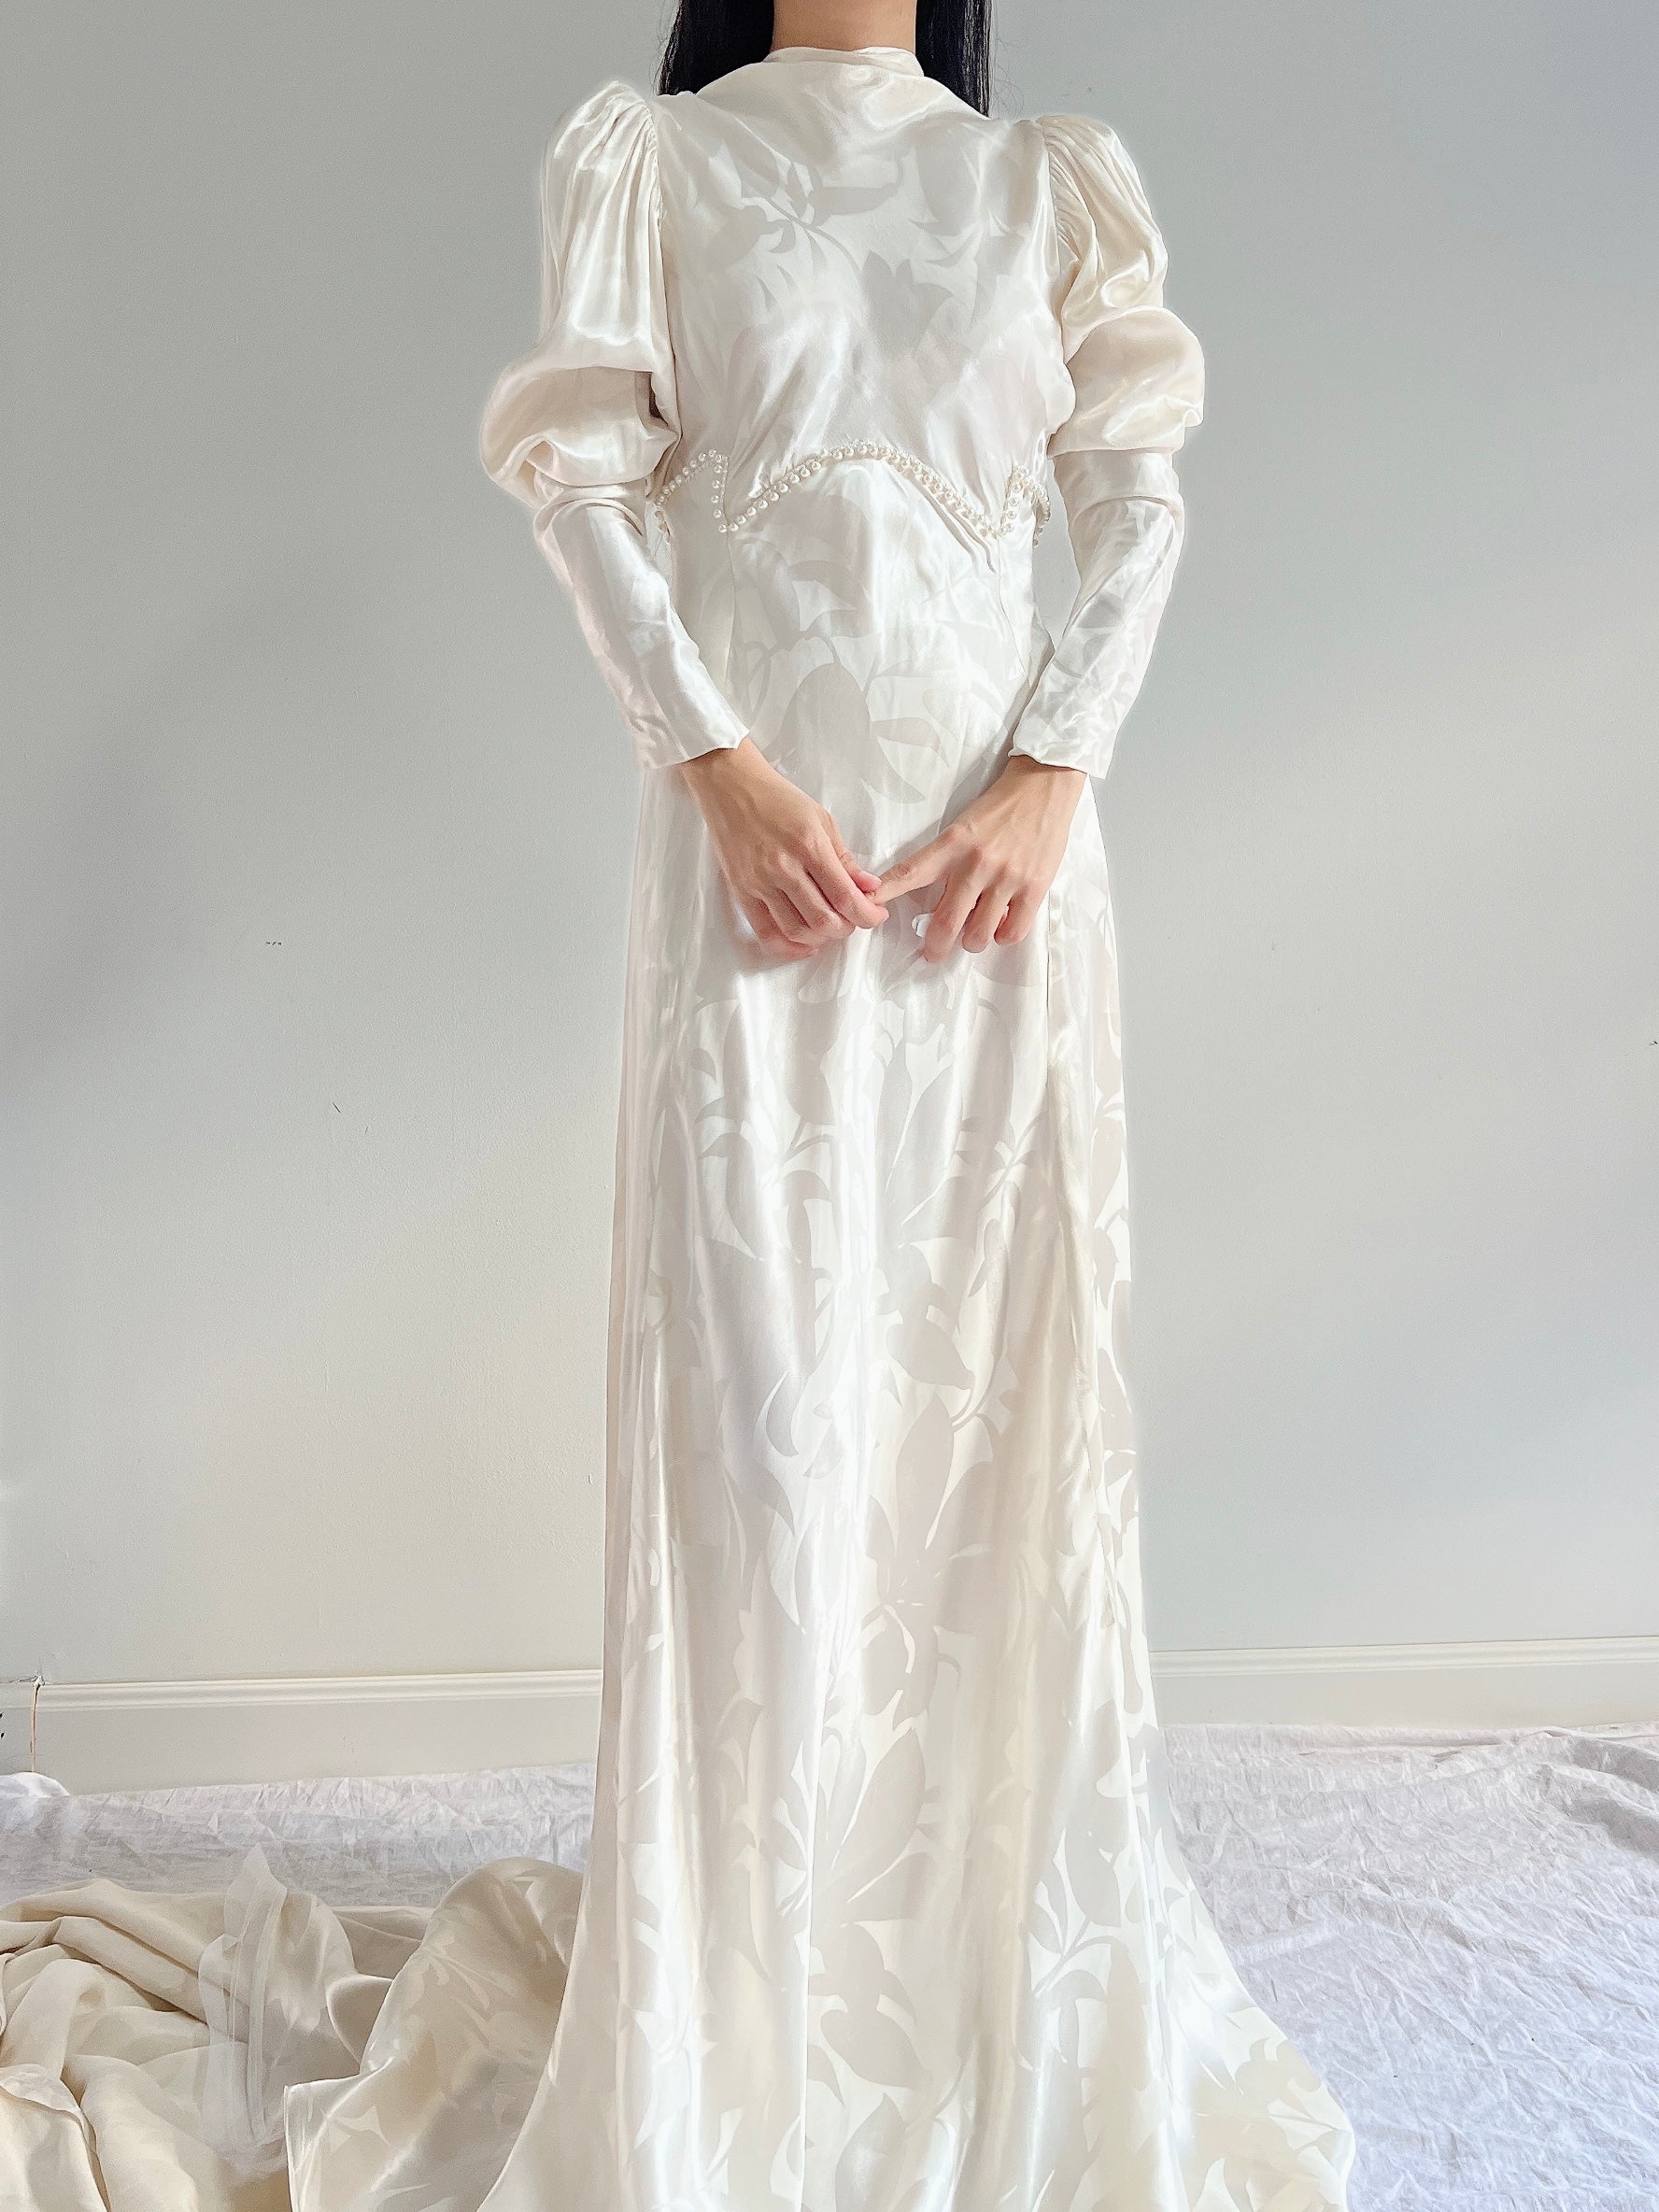 1930s Patterned Satin Mutton Sleeve Gown - S/M